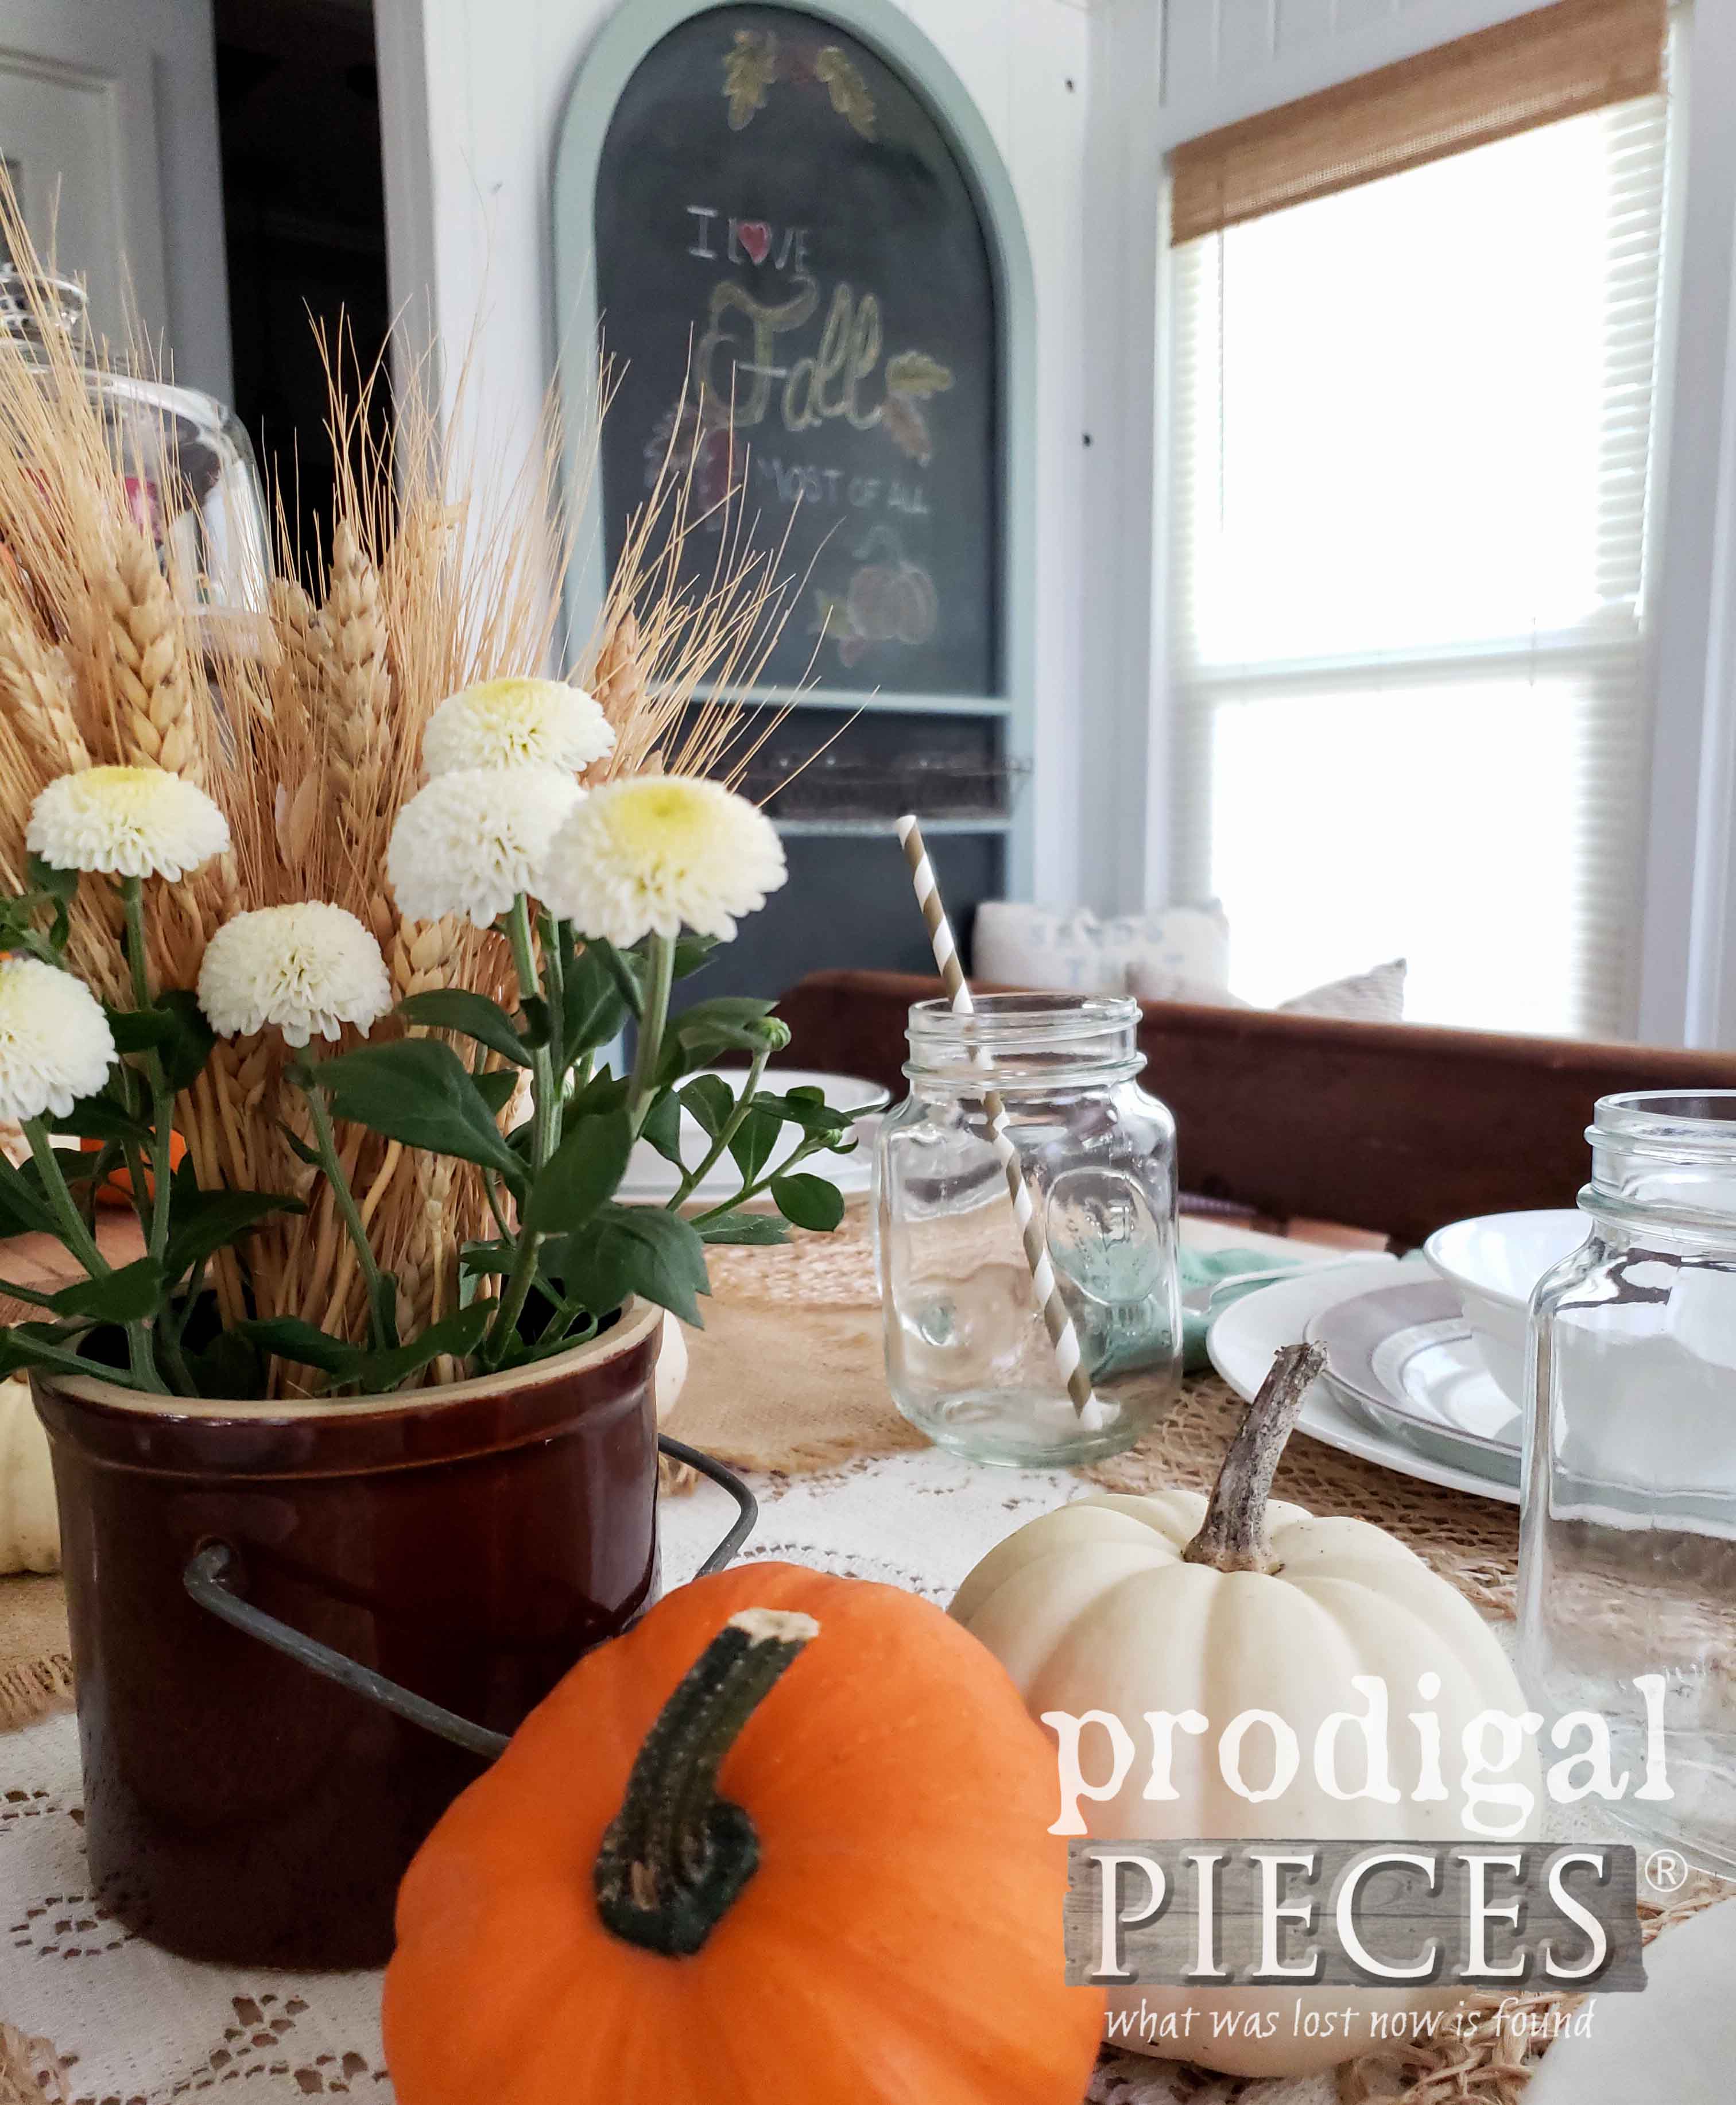 Rustic Farmhouse Fall Decor with Tips from Larissa of Prodigal Pieces using an Upcycled Cheese Dome | prodigalpieces.com